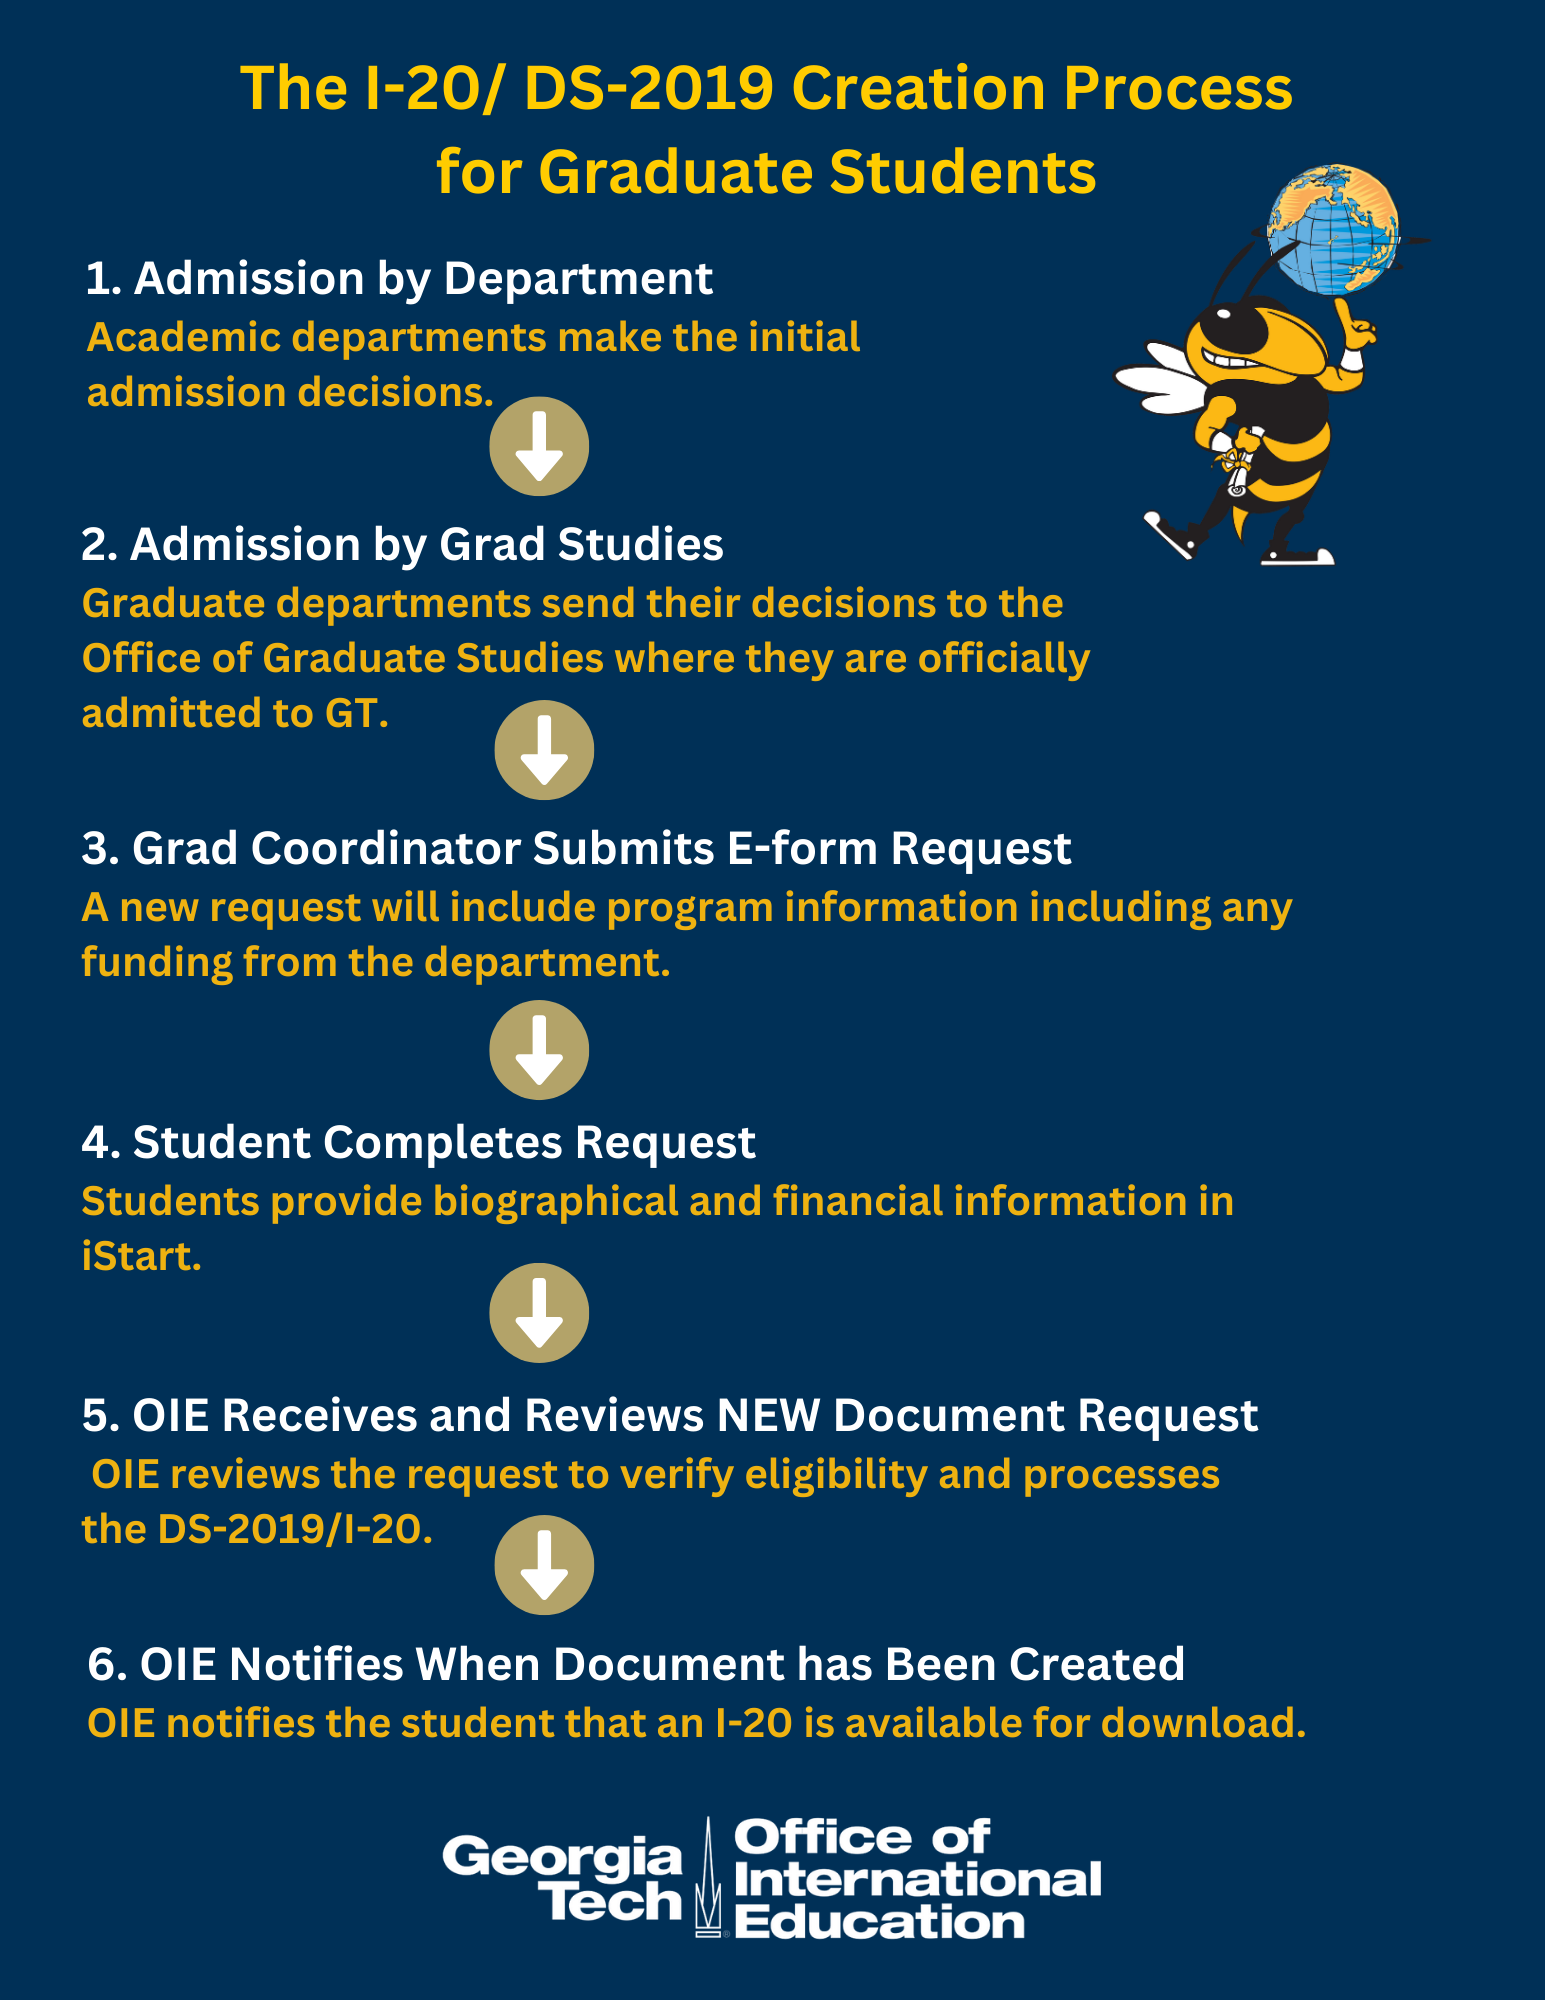 1. Admission by Department Academic departments make the initial admission decisions. 2. Admission by Grad Studies Graduate departments send their decisions to the Office of Graduate Studies where they are officially admitted to GT. 3. Grad Coordinator Submits E-form Request A new request will include program information including any funding from the department. 4. Student Completes Request Students provide biographical and financial information in iStart. 5. OIE Receives and Reviews NEW Document Request OlE reviews the request to verify eligibility and processes the DS-2019/1-20. 6. OlE Notifies When Document has Been Created OlE notifies the student that an I-20 is available for download.